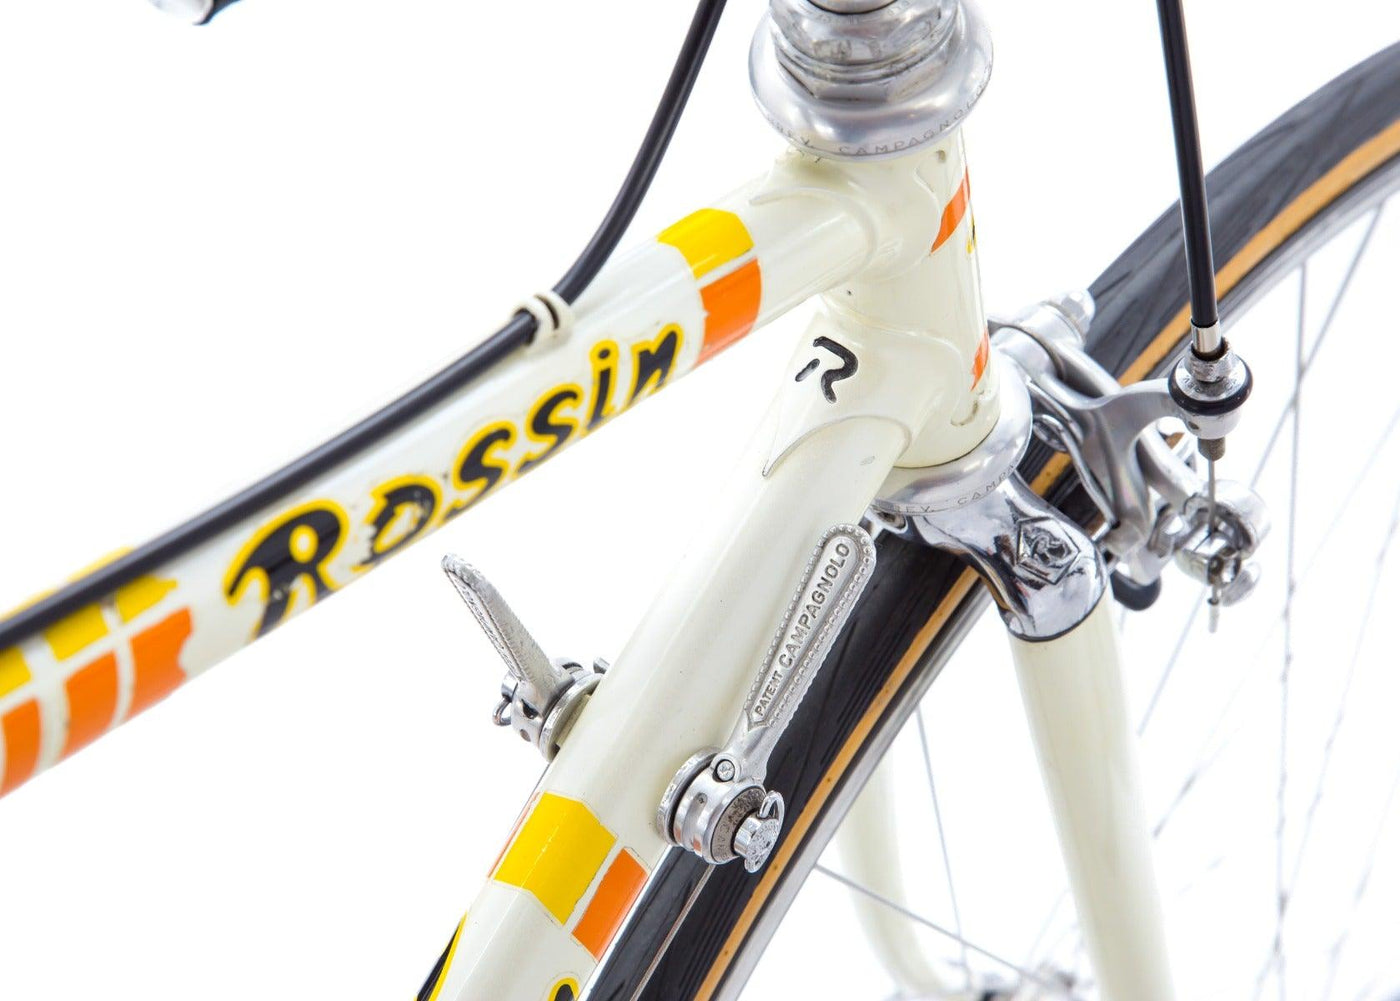 Rossin Record Pantographed Road Bicycle 1980s - Steel Vintage Bikes